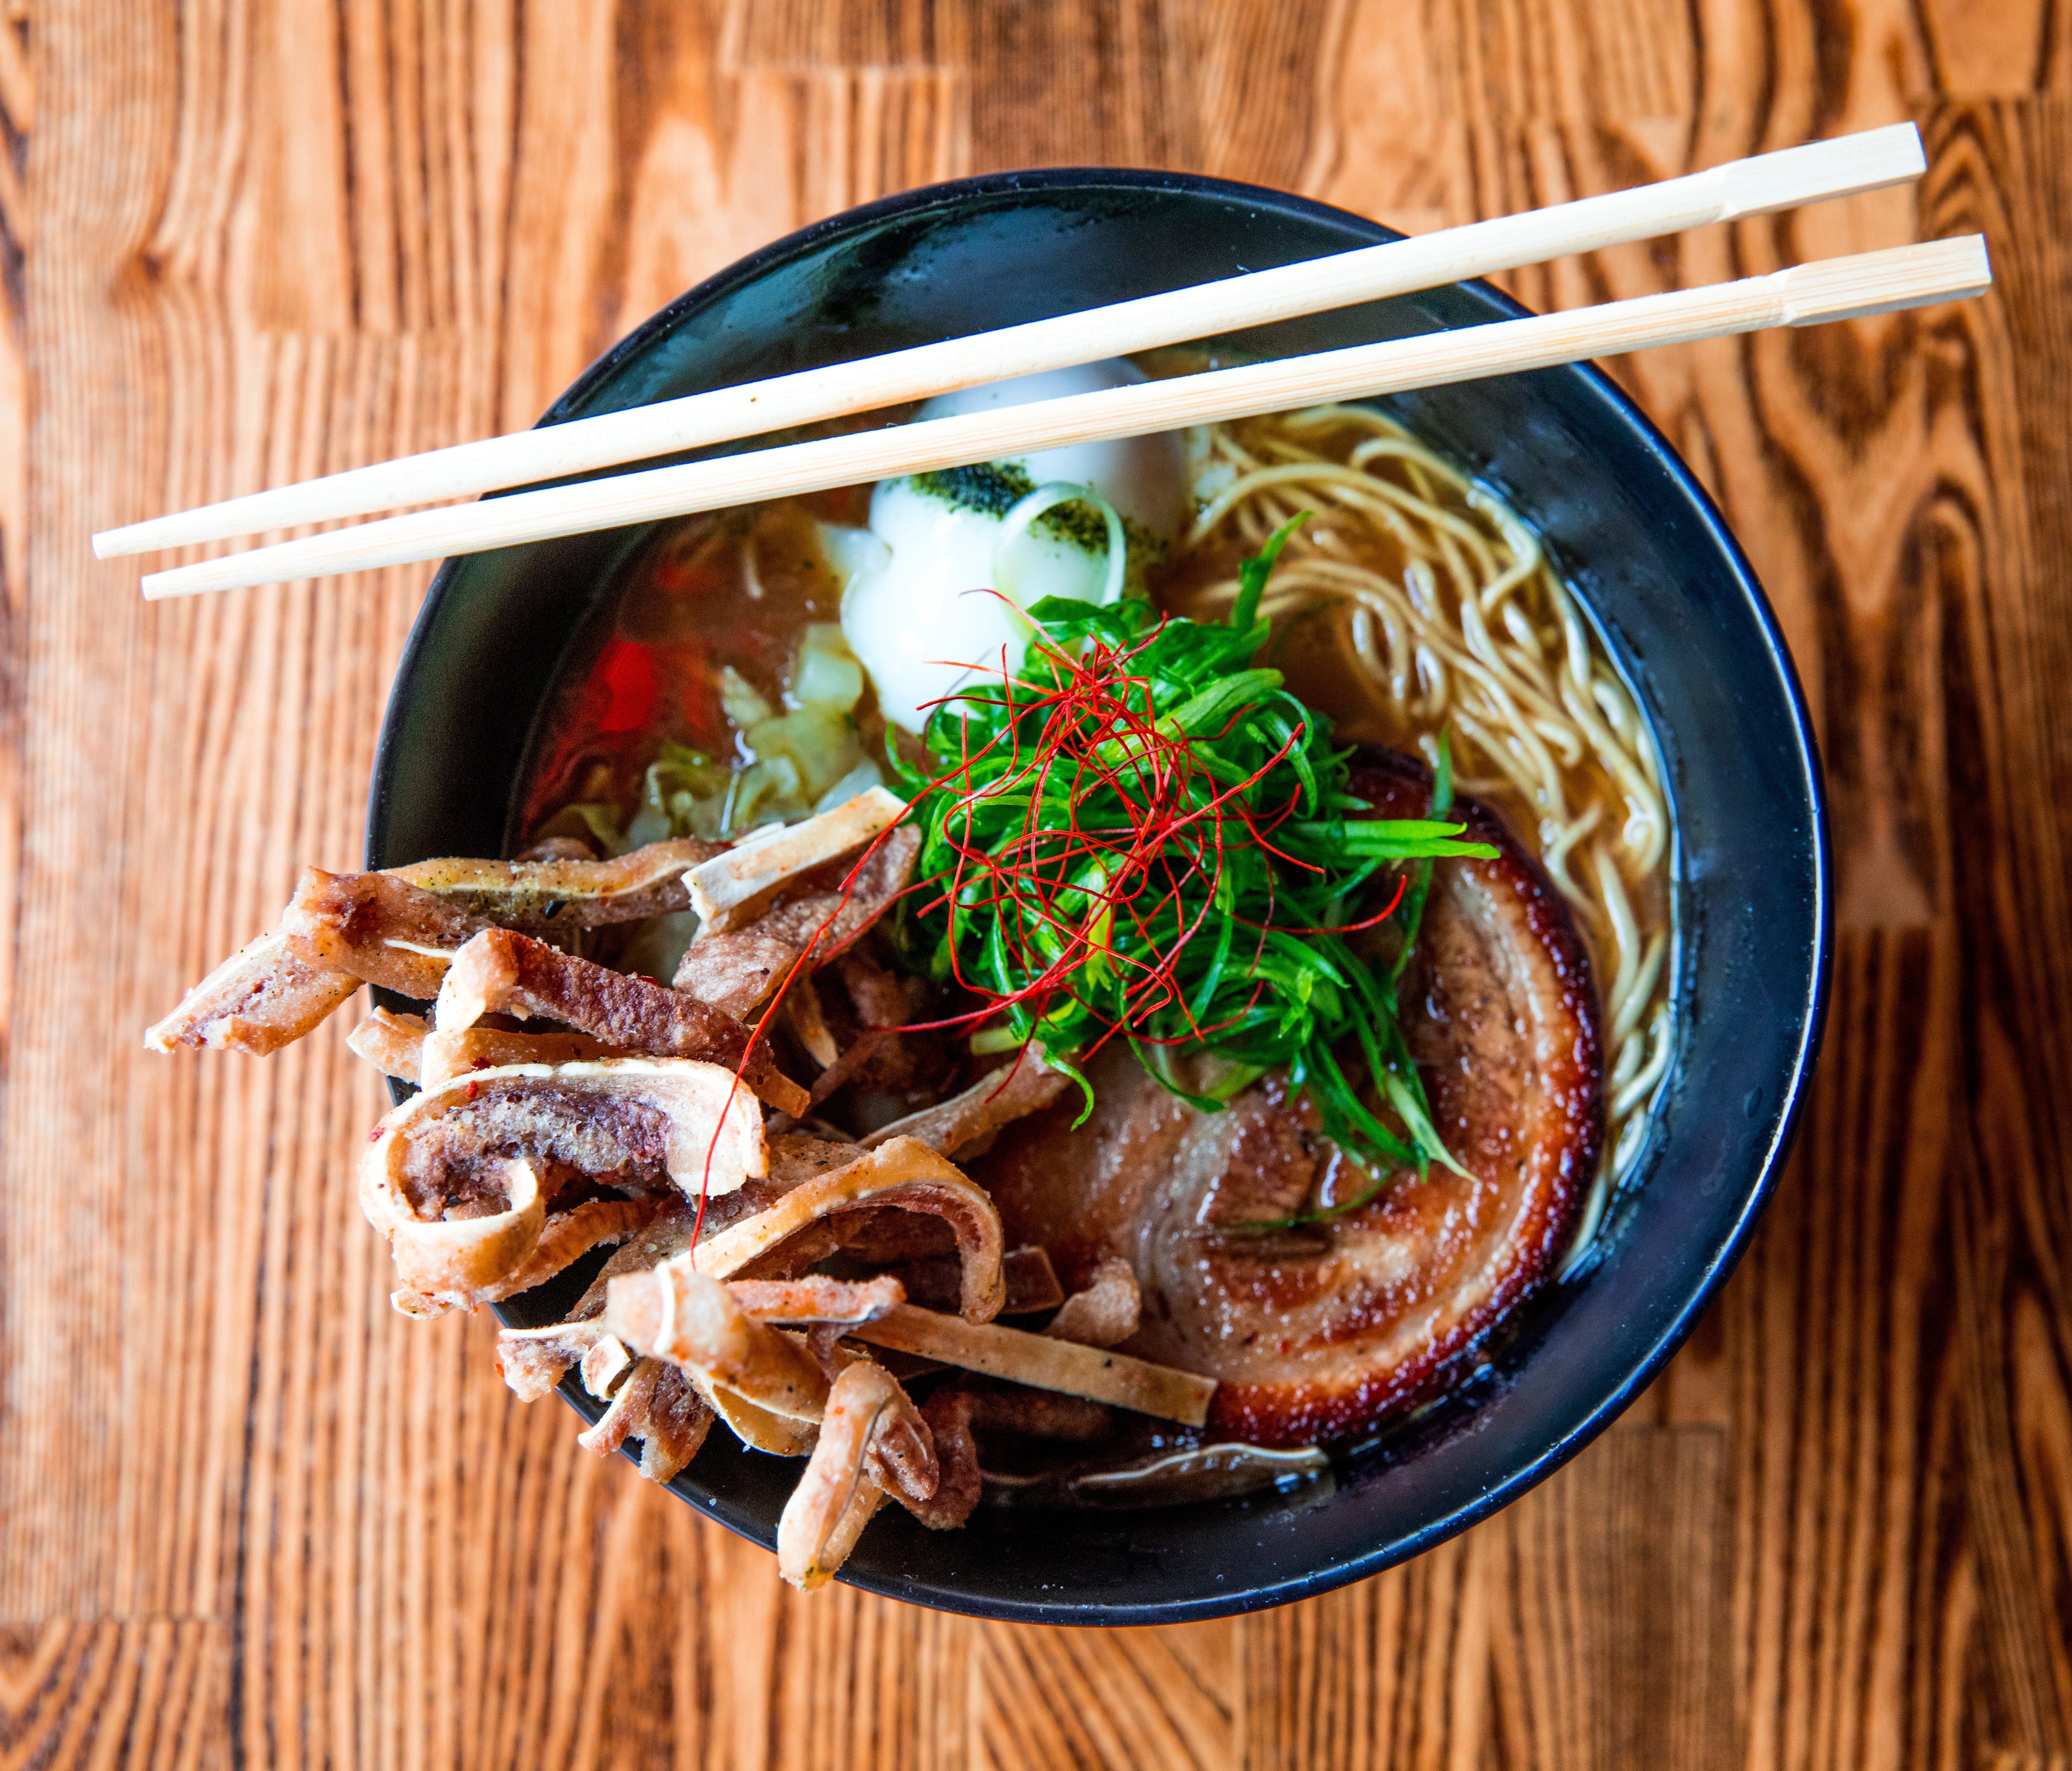 Salt Like City, Utah's Yoko Ramen offers a deceivingly simple menu full of complex flavors. Pork, chicken or vegan miso ramen can be topped with pork belly, kimchi, miso butter and more.